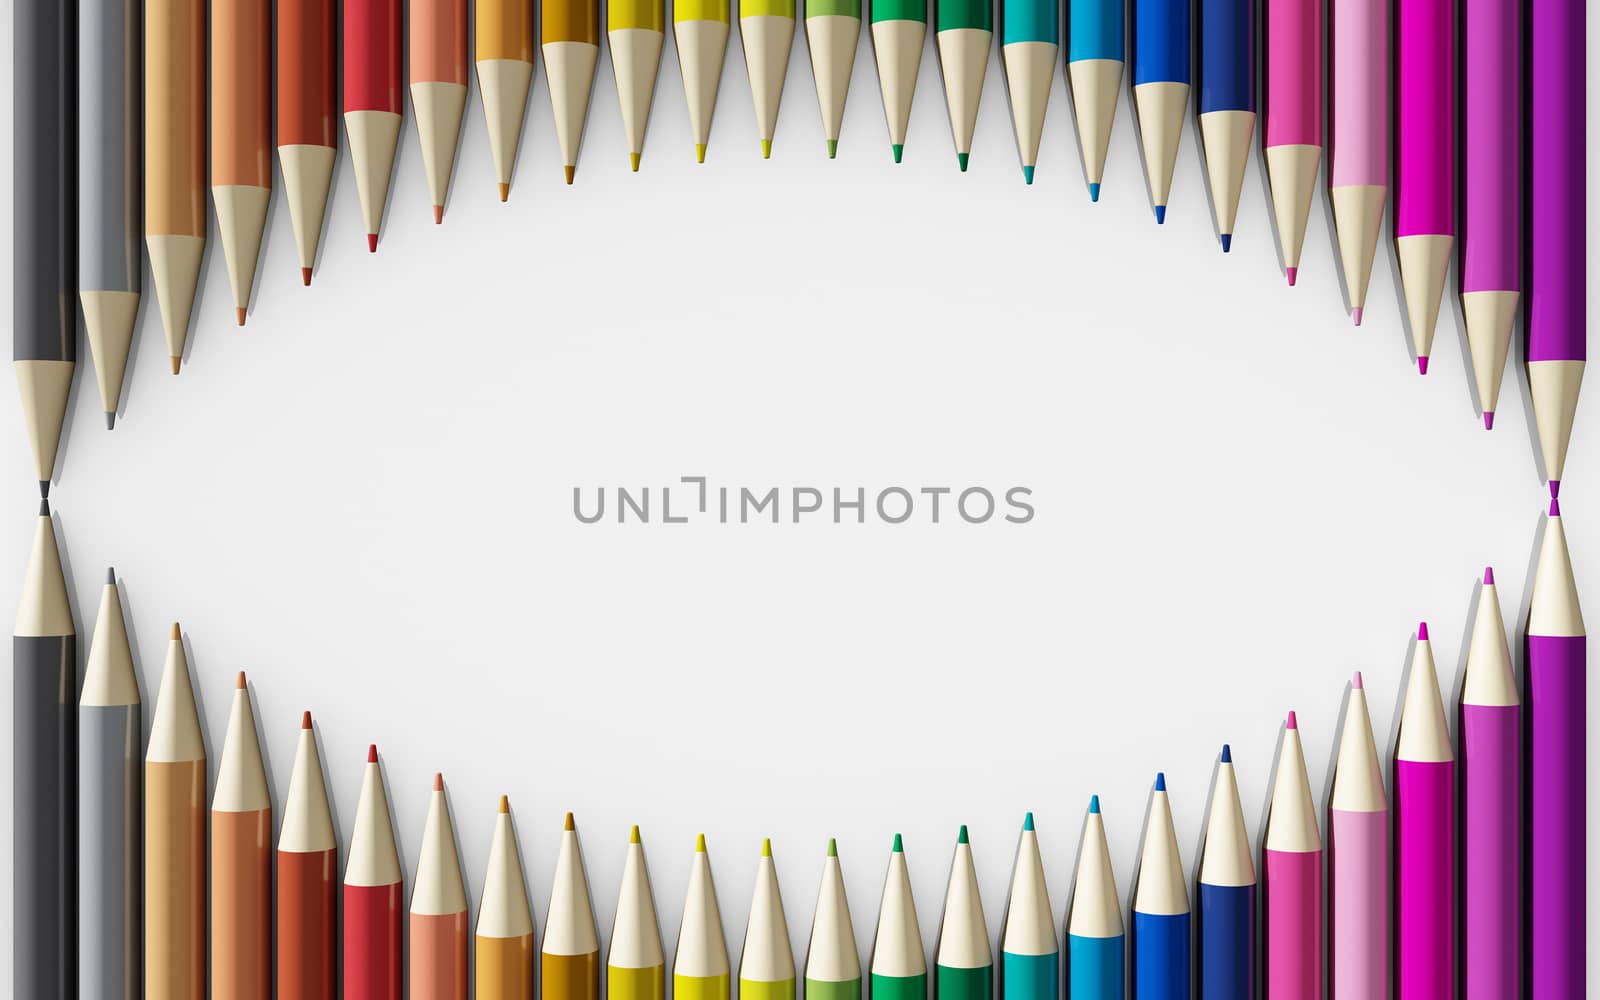 Colour pencils isolated on white background close up, stationery object